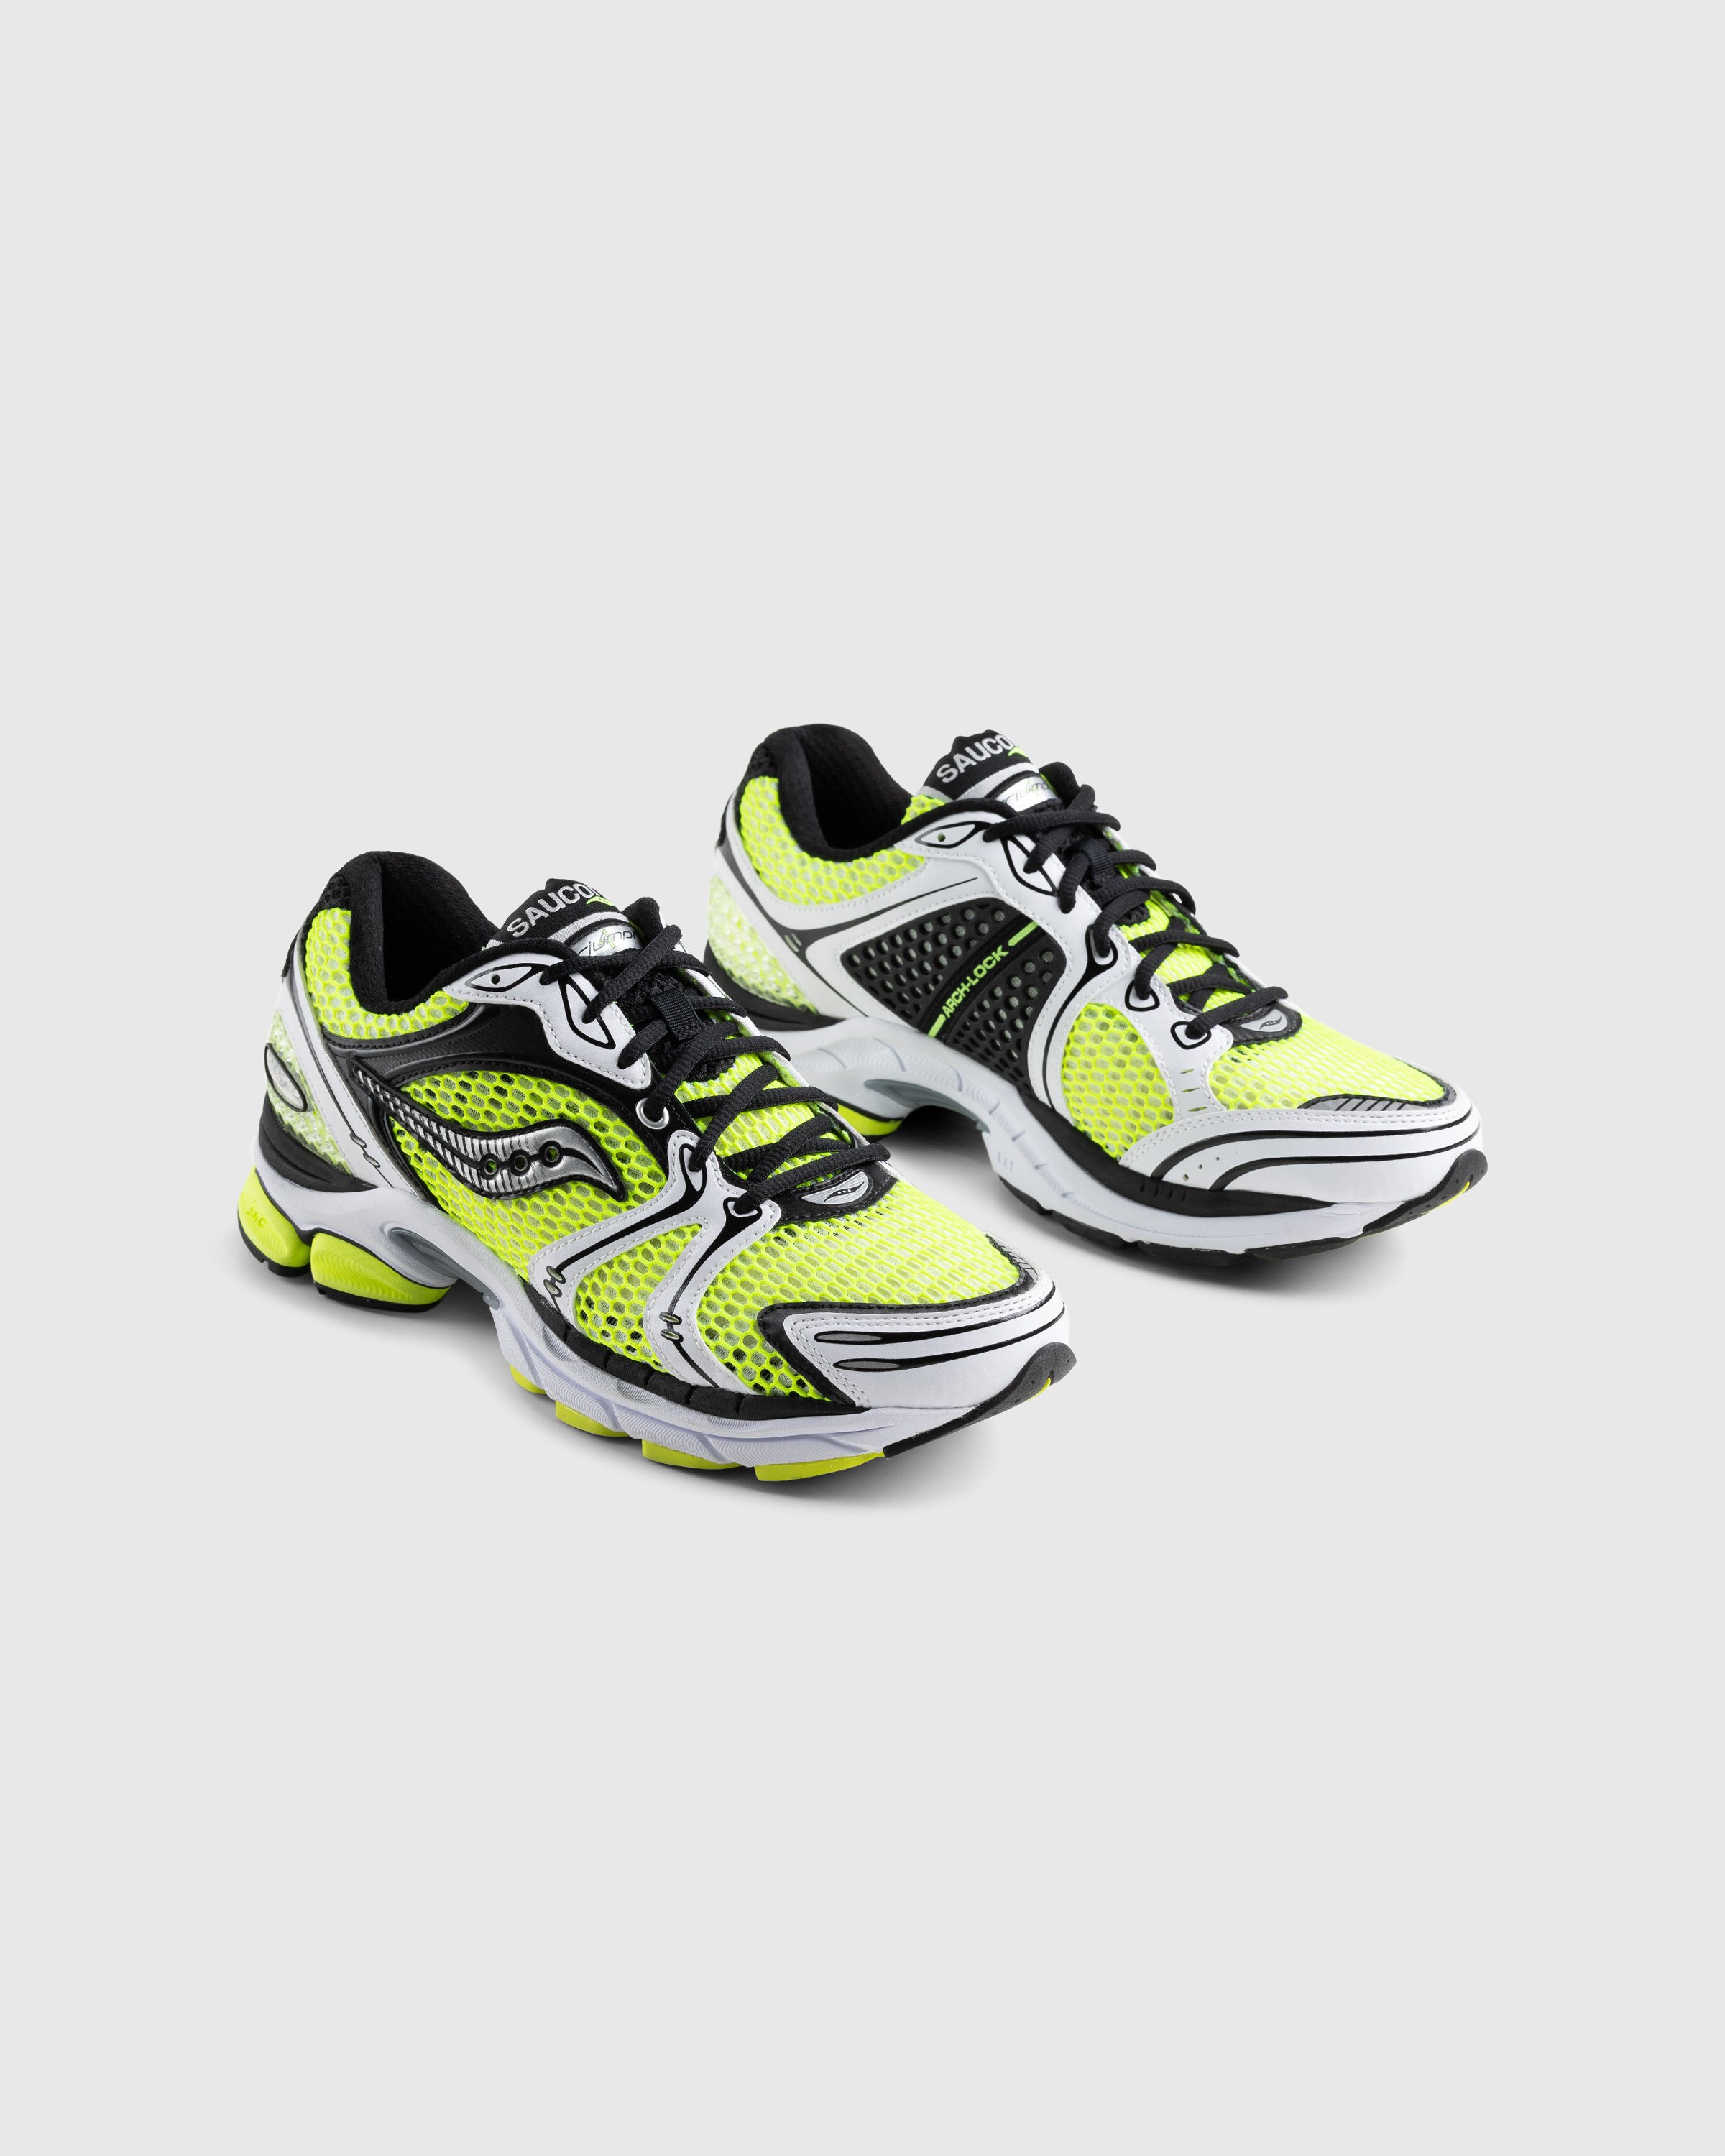 Saucony - ProGrid Triumph 4 Yellow/Silver - Footwear - Yellow - Image 3